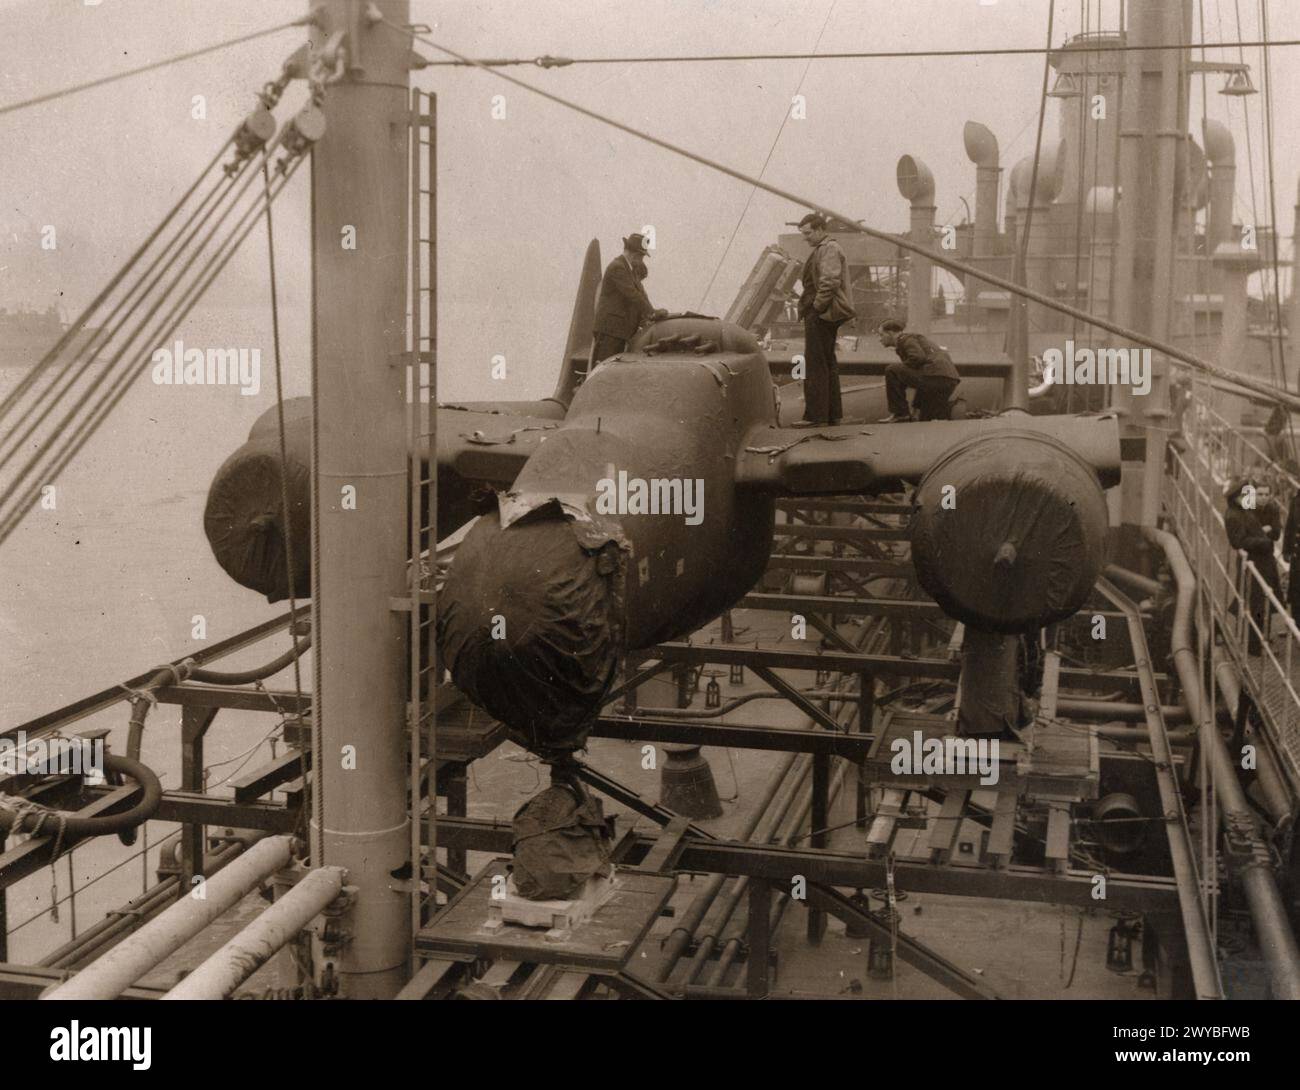 UNITED STATES ARMY AIR FORCES (USAAF) IN BRITAIN, 1942-1945 - US Personnel unload a wrapped P-61 Black Widow at Liverpool docks.Image stamped on reverse: 'Associated Press.' [stamp], 'Not to be published [no date].' [stamp], 'Passed & censored 1 Apr 1944.' [stamp], 'Passed for publication 4 Jun 1945.' [stamp], '314297.' [censor no].Printed caption on reverse: 'The 'Black Widow' arrives in EnglandAssociated Press Photo Shows:- 'Black Widows' on board the ship which brought them safely from U.S. to this country ready for unloading.'Handwritten caption on reverse: '266416.' , Stock Photo